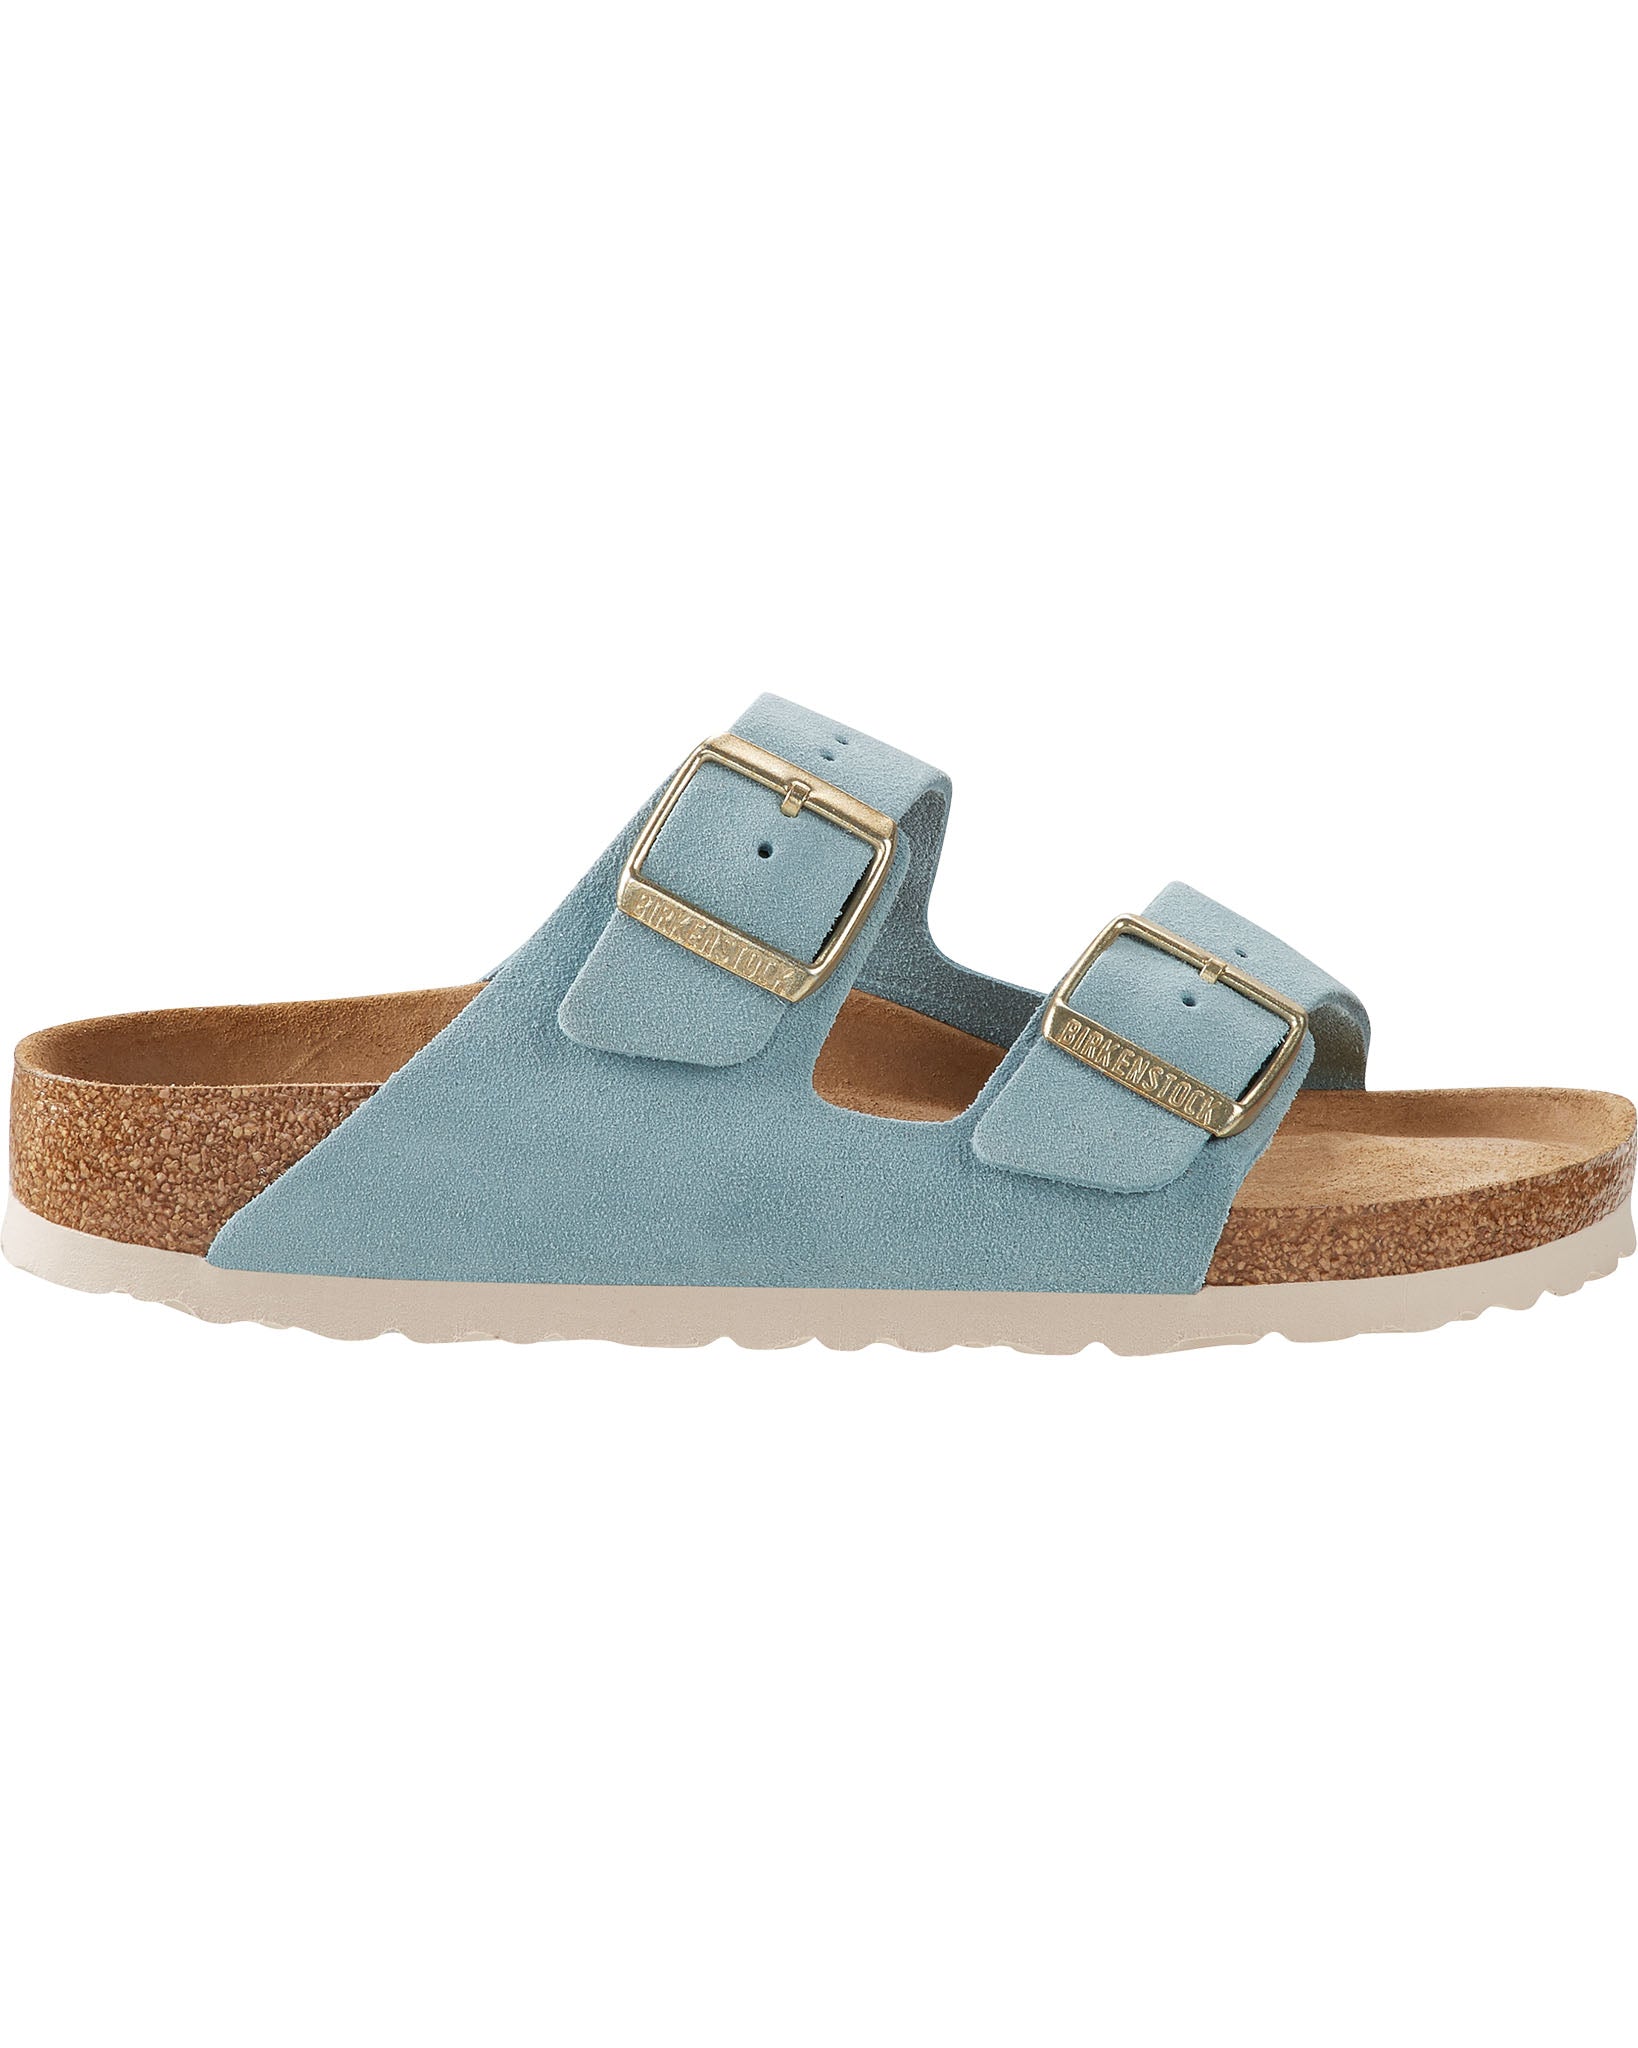 Arizona Soft Footbed Light Blue Suede Leather Sandals